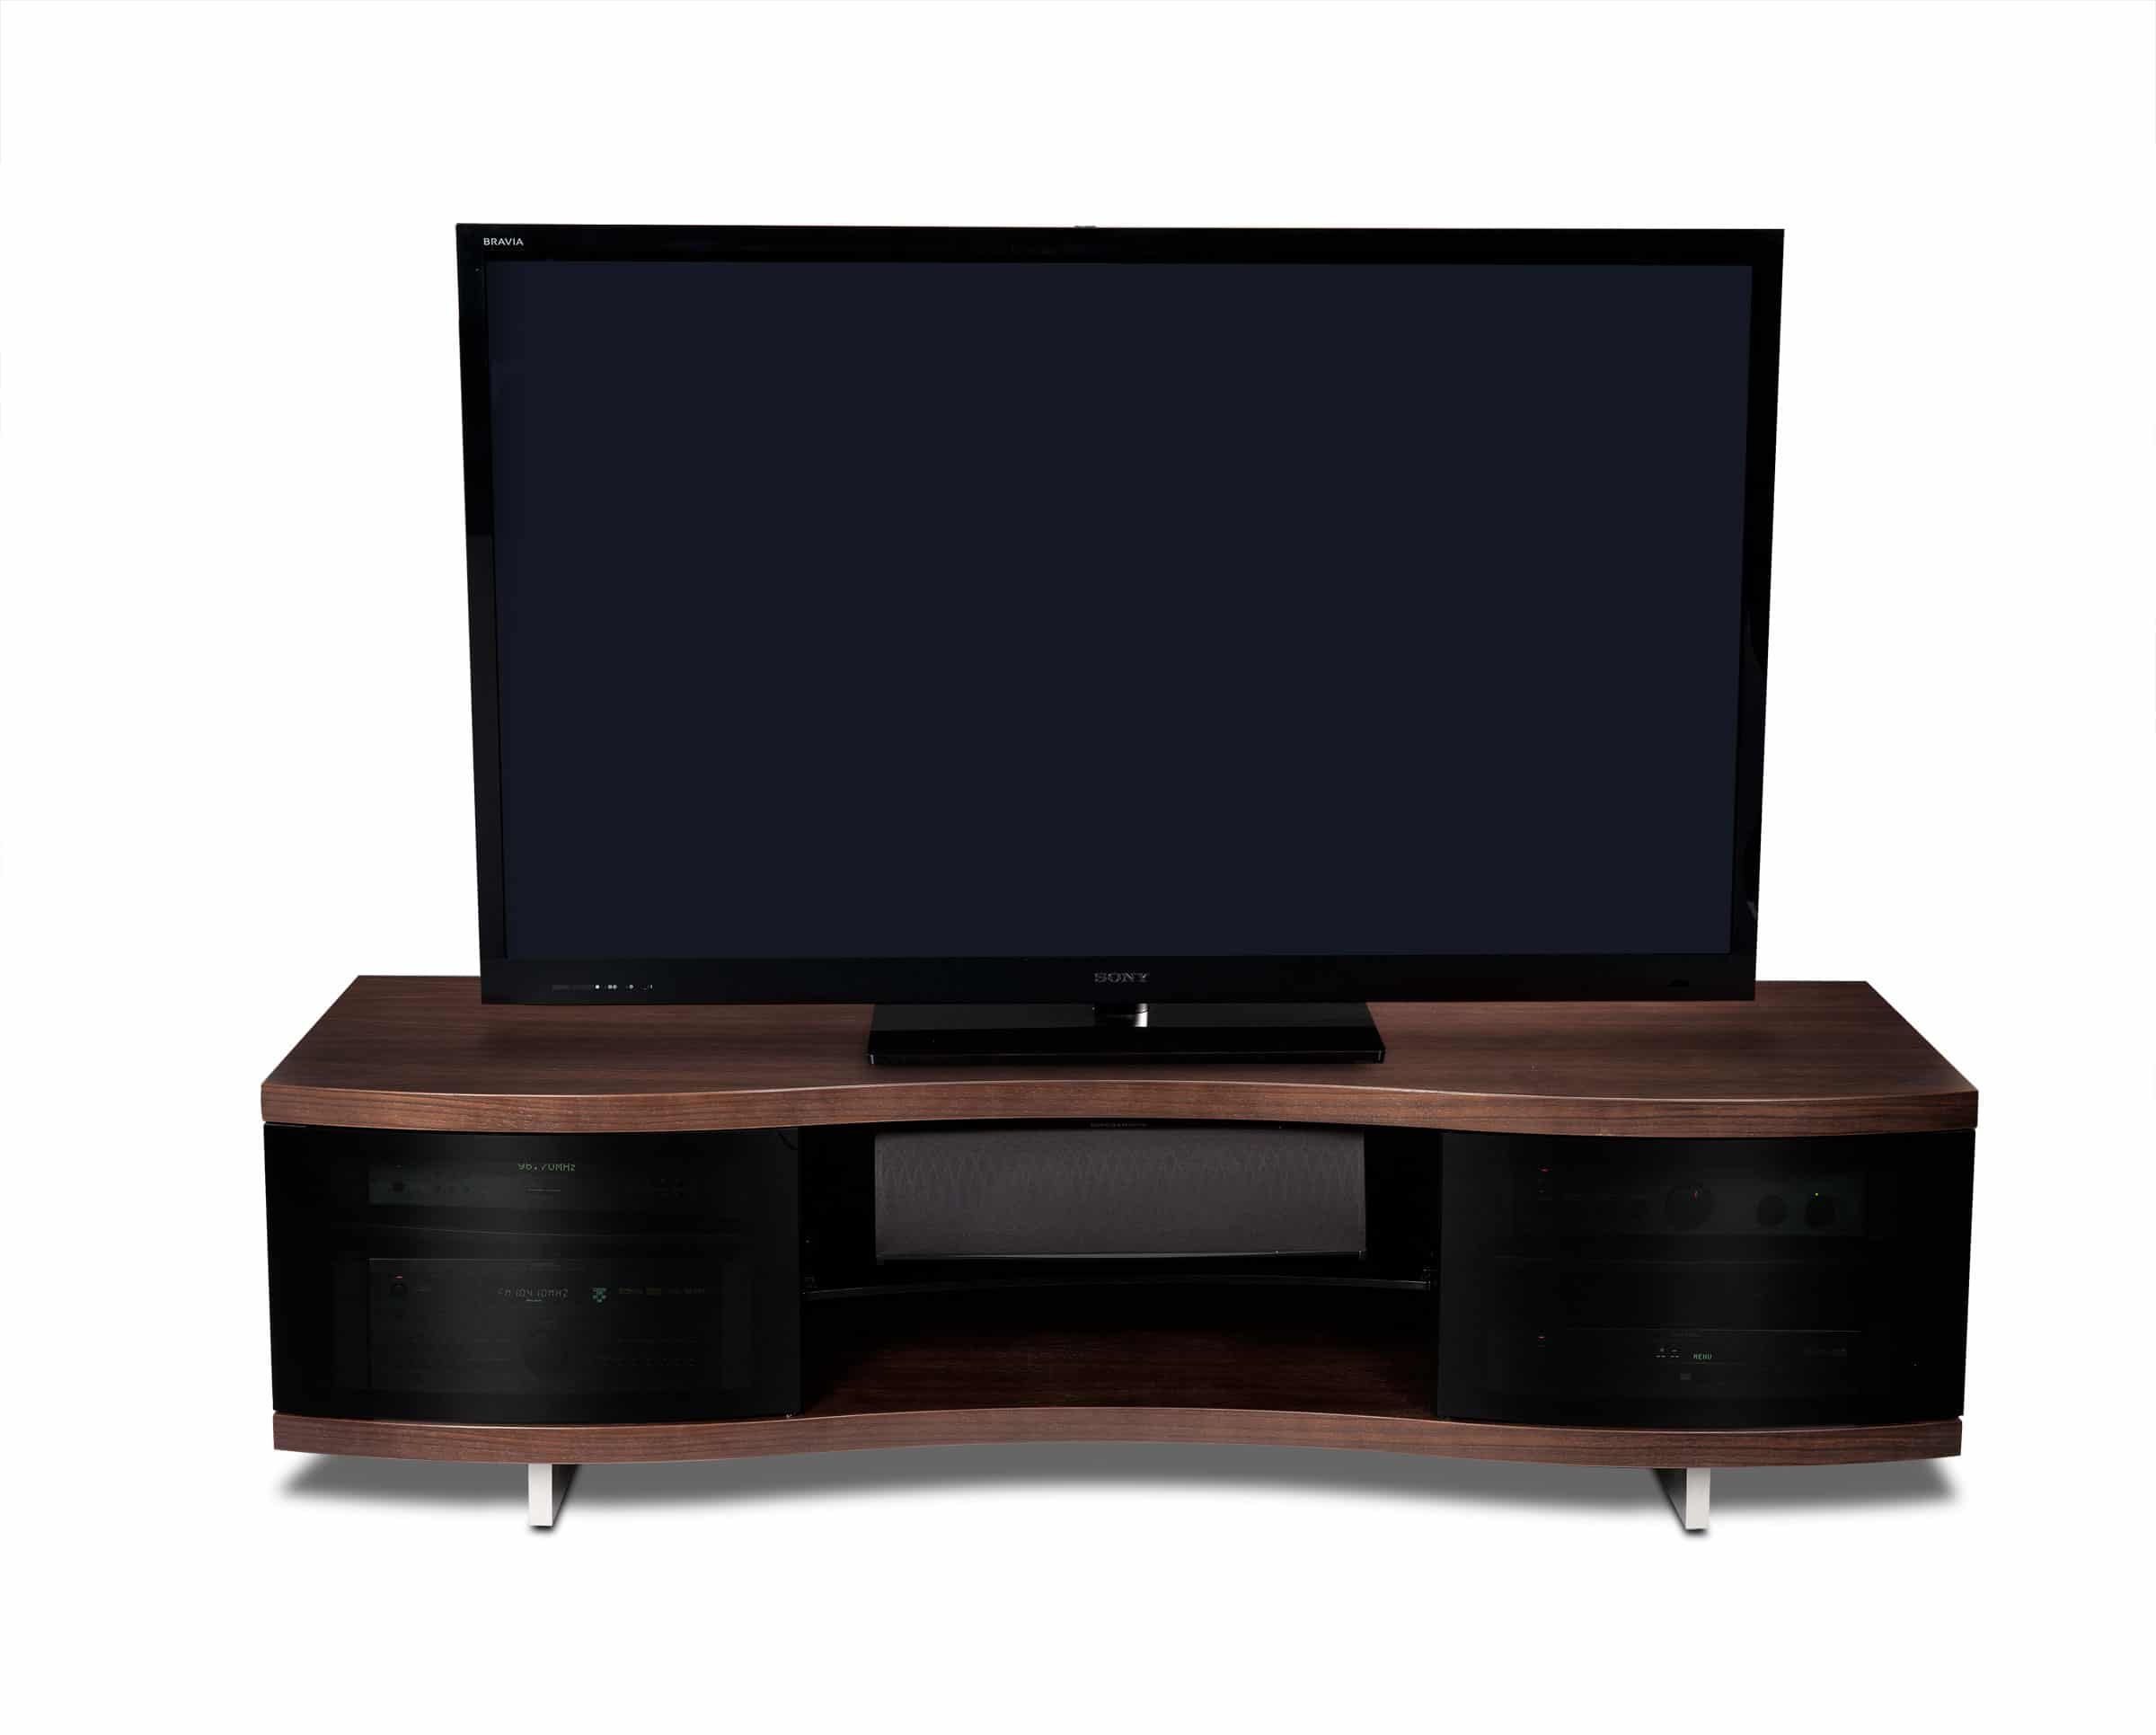 Ola 8137 Curved Tv Stand & Media Cabinet | Bdi Furniture In Tv Media Stands (View 10 of 15)